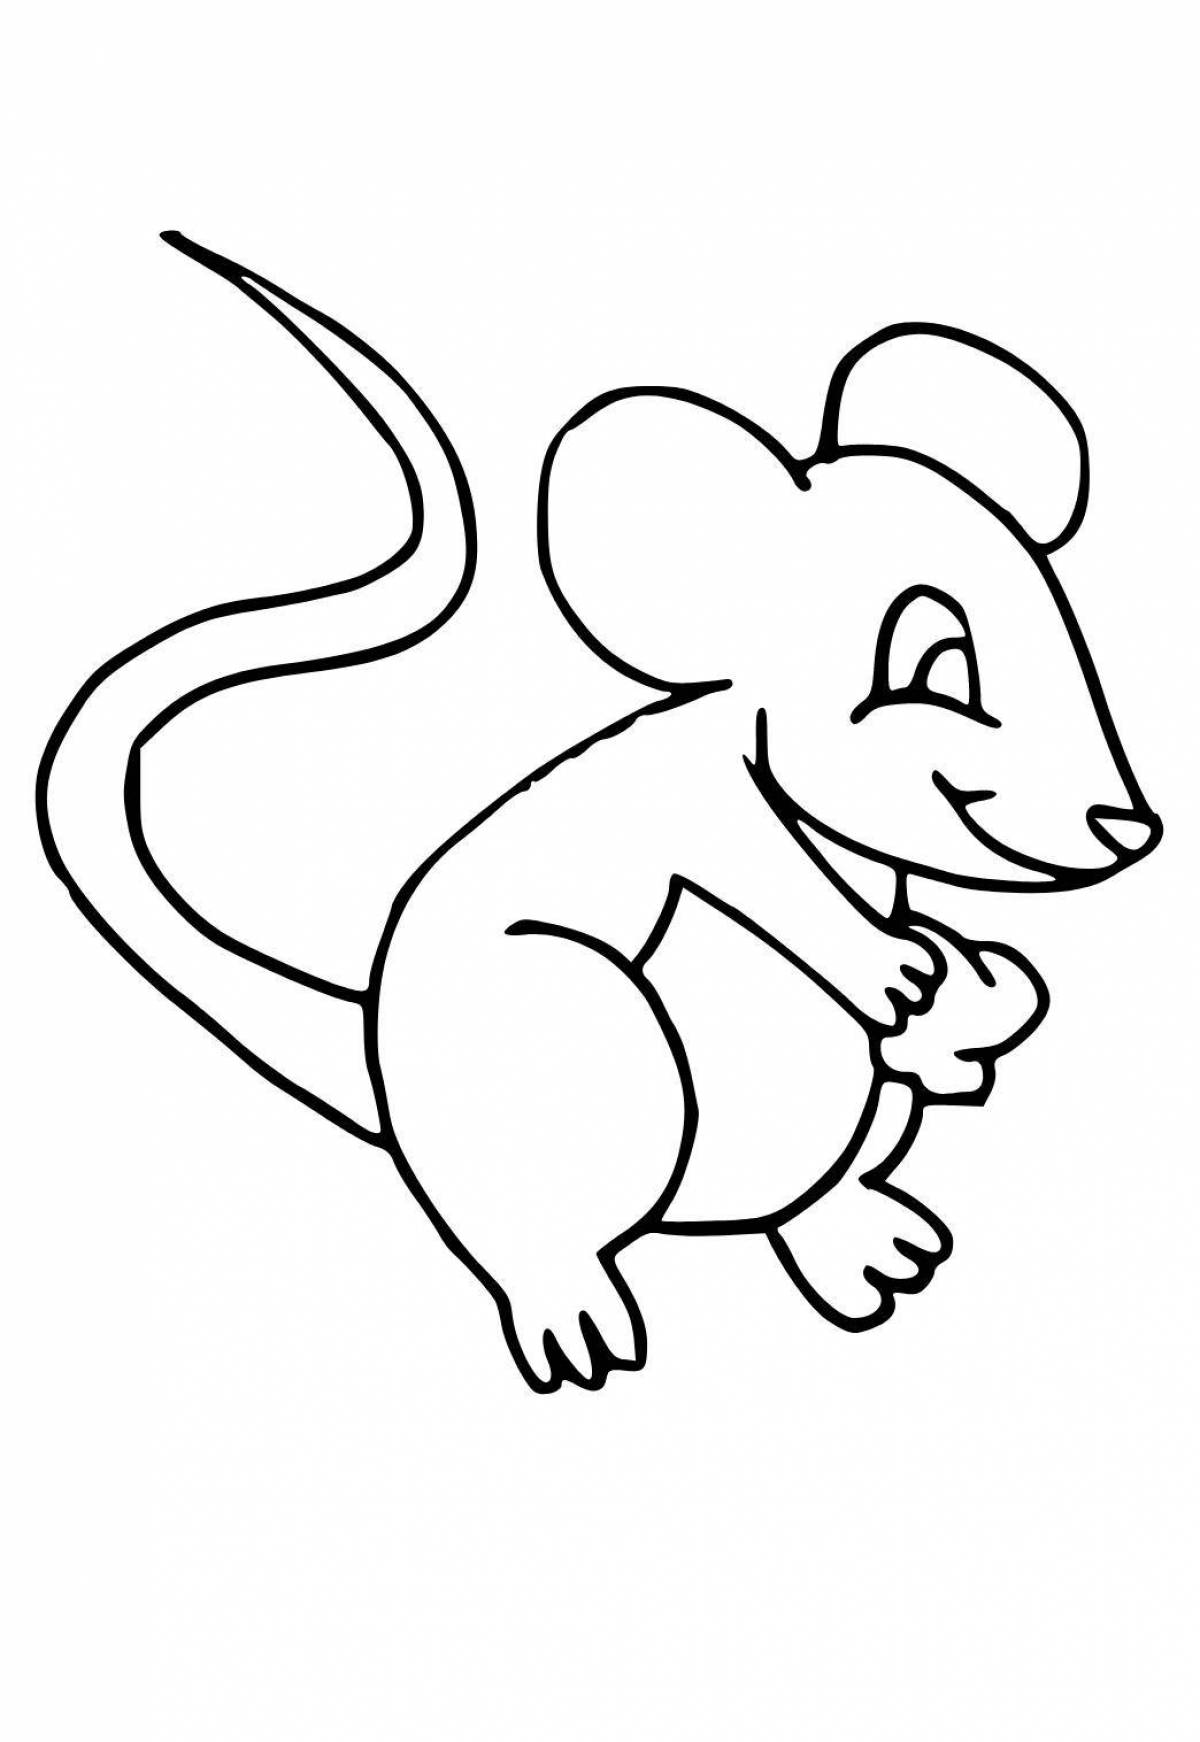 Adorable mouse and bear coloring book